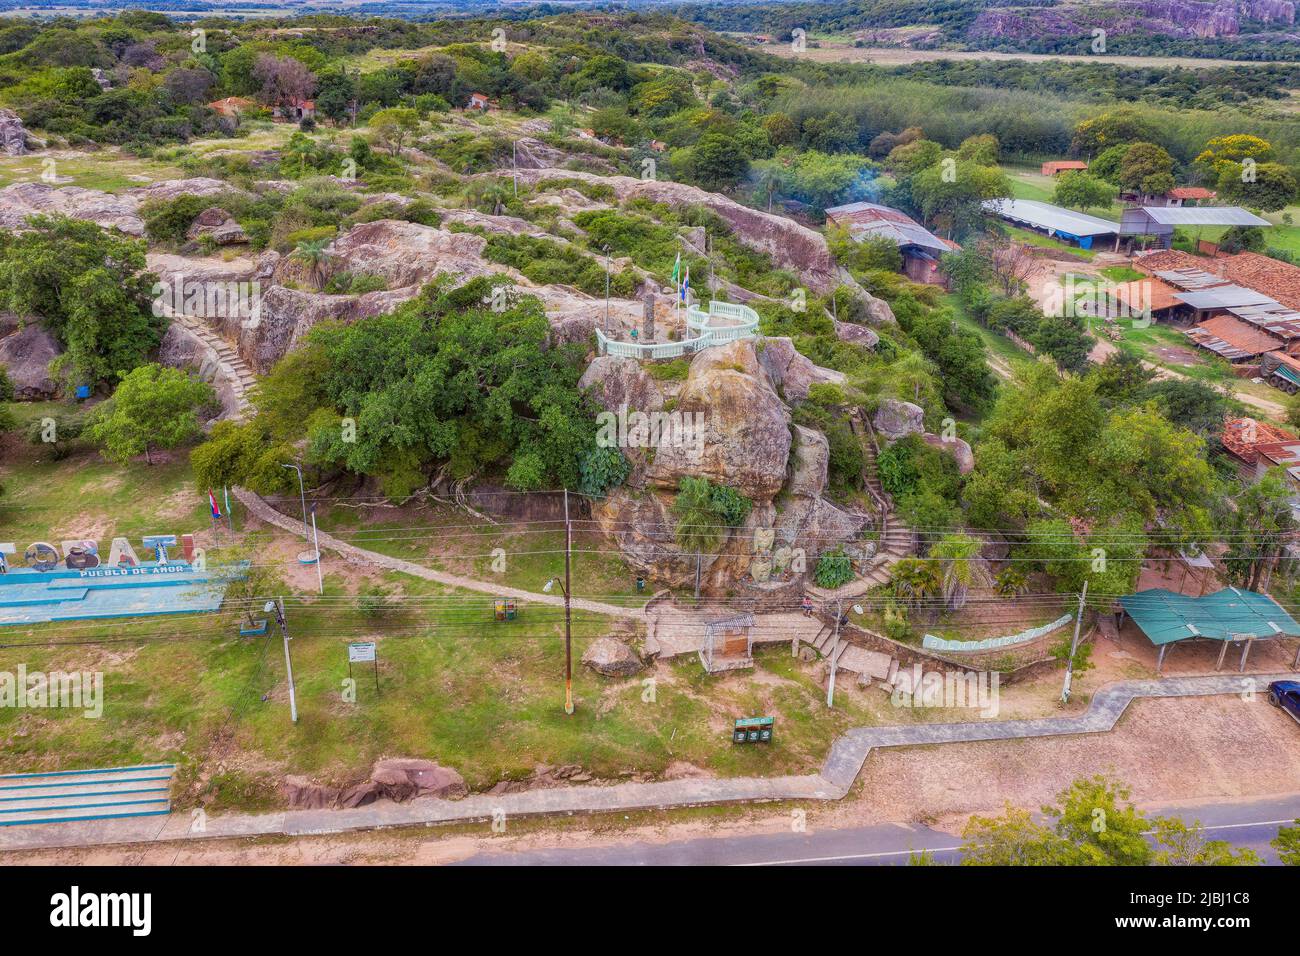 Tobati, Cordillera, Paraguay - May 09, 2022: Aerial view of the viewpoint in Tobati (Mirador Tobati) symbolizes the pottery and craftsmanship of the c Stock Photo